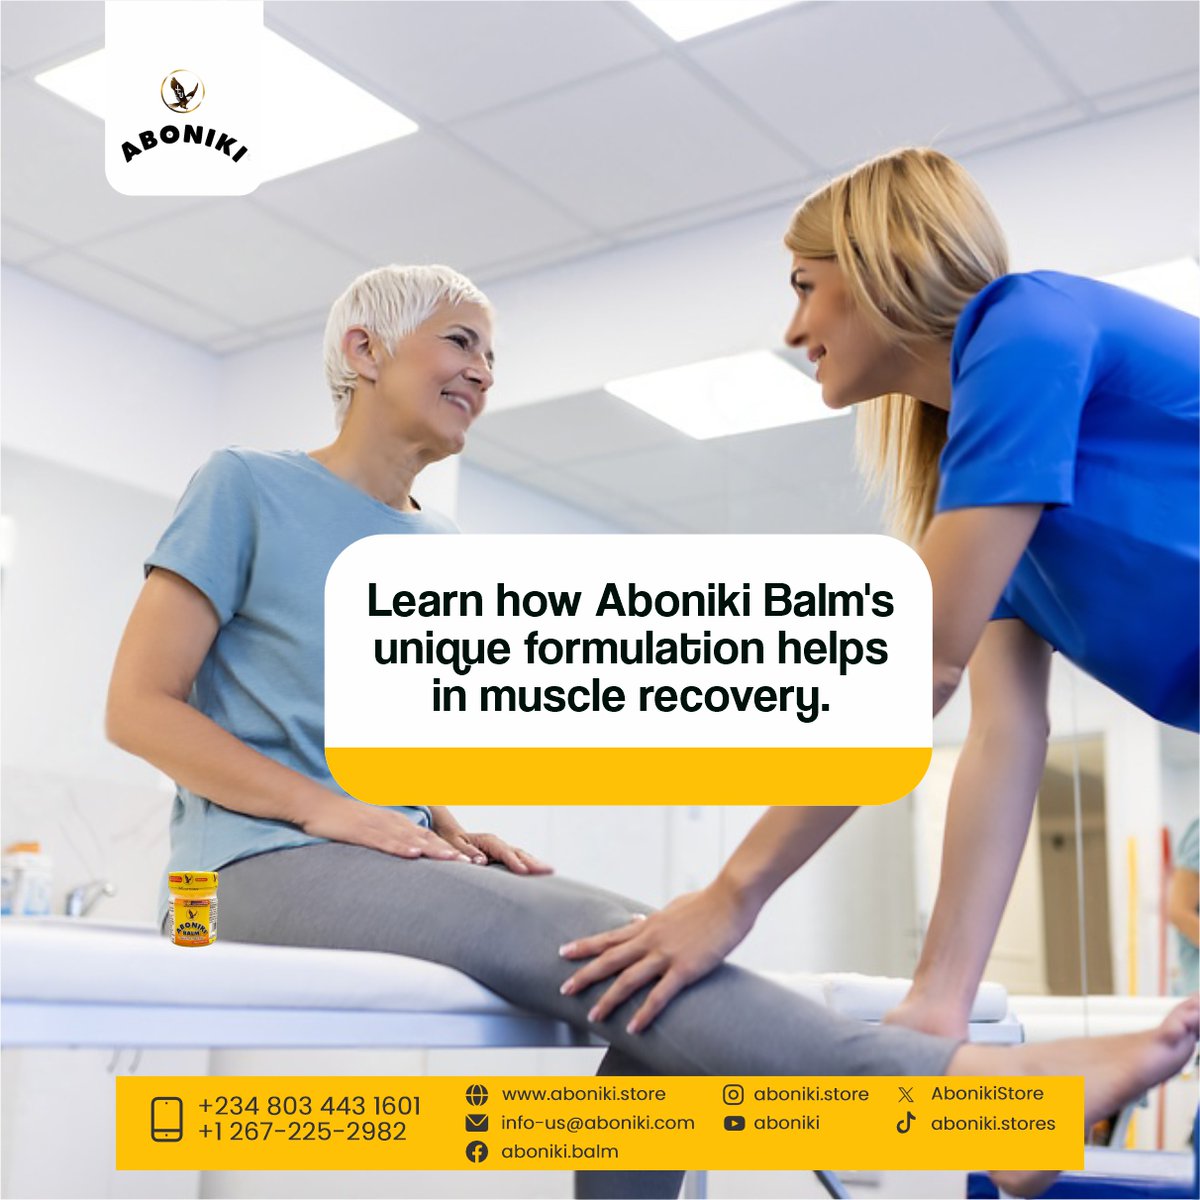 Aboniki Balm is a testament to the power of nature in healing and rejuvenation - Its carefully crafted blend includes: Eucalyptus Oil, Menthol, Methyl Salicylate   and Camphor.
#MuscleRecovery #NaturalHealing #FitnessJourney #AthleteCare #PostWorkoutRelief #EucalyptusOilBenefits